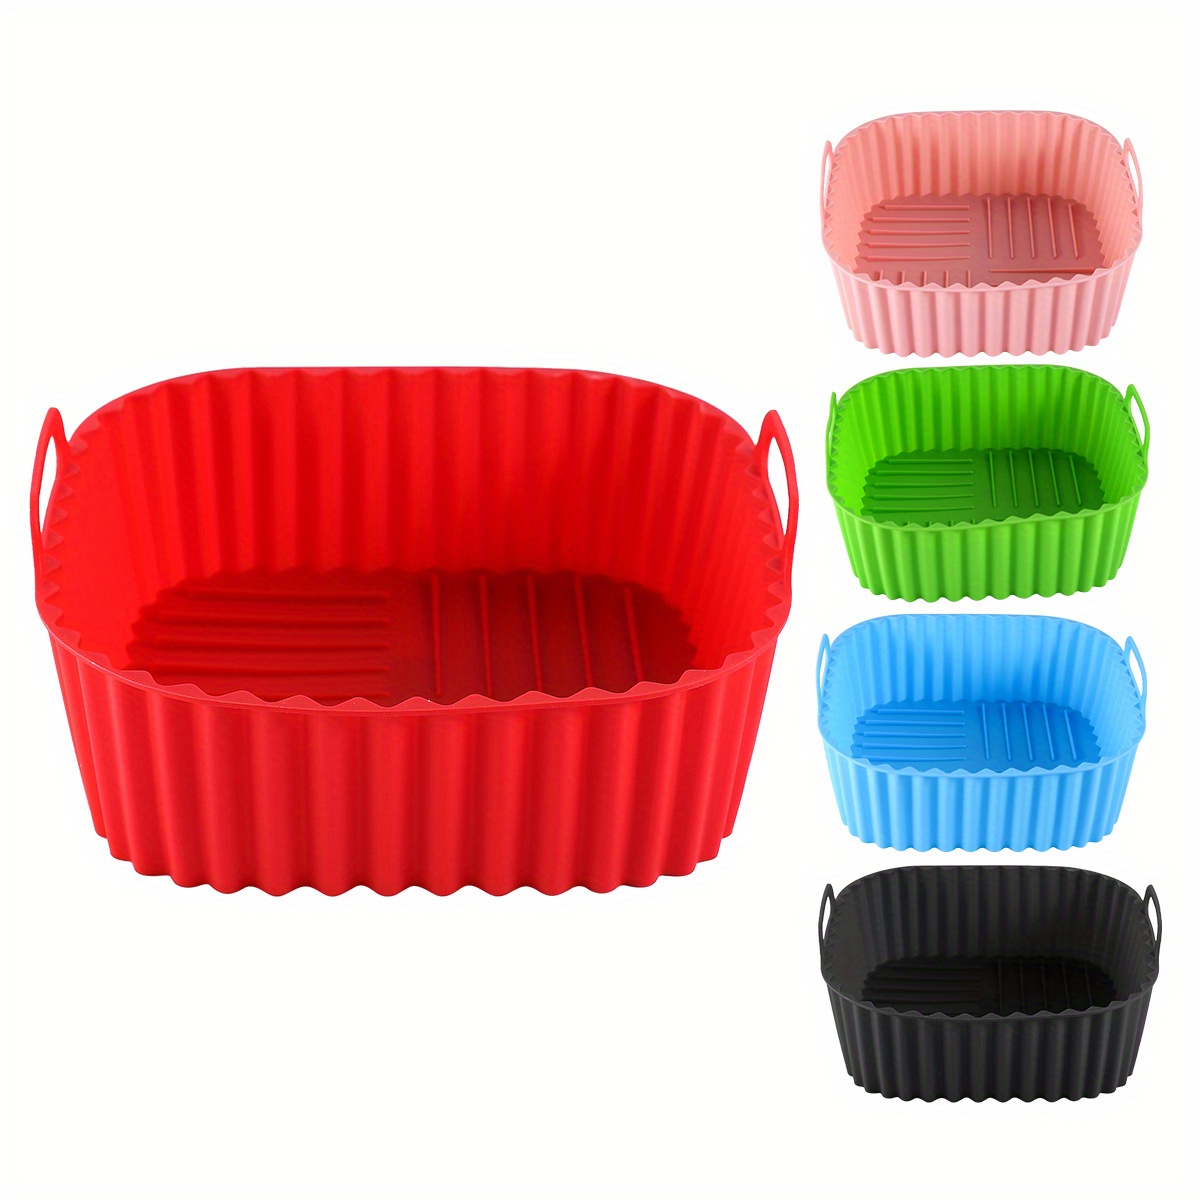 Silicone Air Fryer Liners & Muffin Top Pan Fit for 5 to 8 Qt